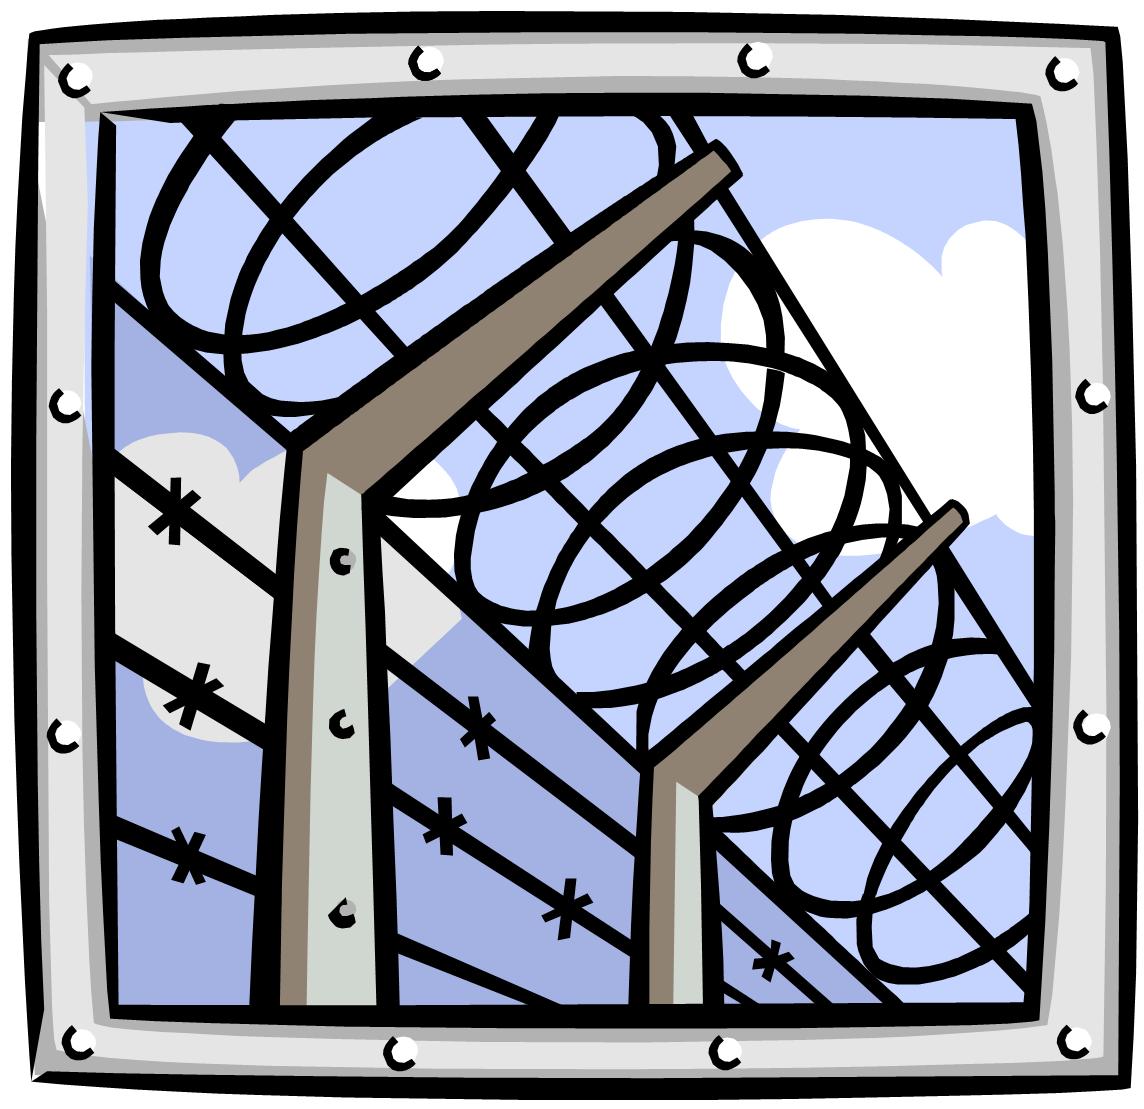 free clipart images jail - photo #32